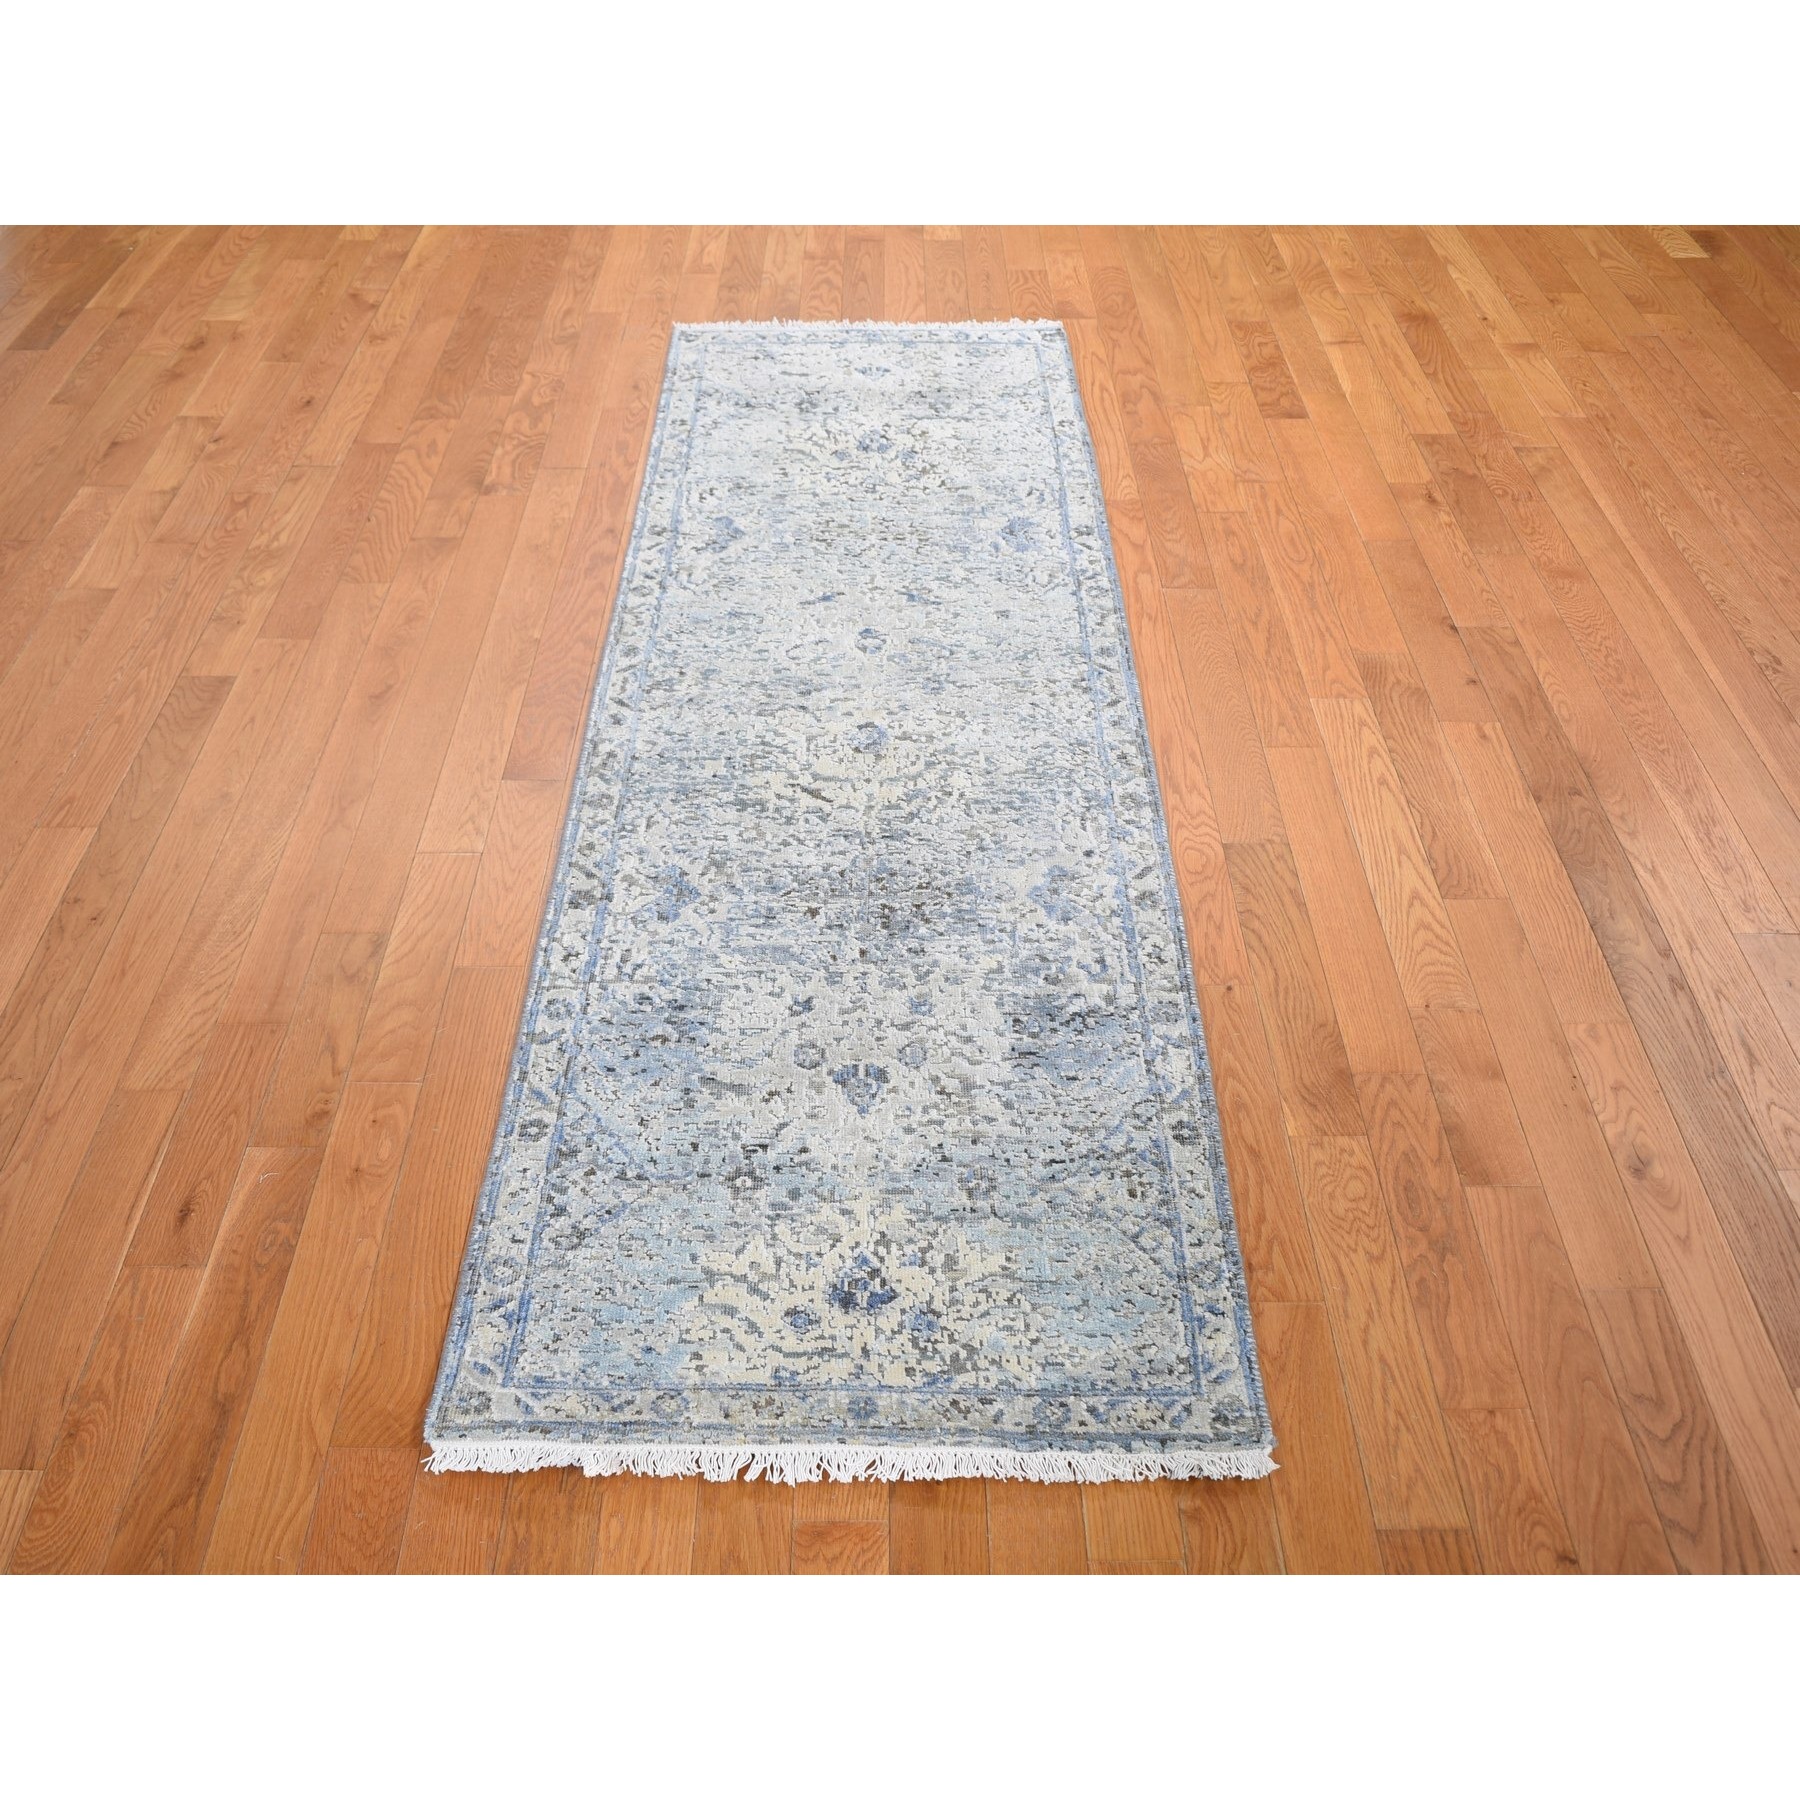 2'6"x8' Ivory Distressed Oushak Pure Silk with Textured Wool Runner Hand Woven Oriental Rug 